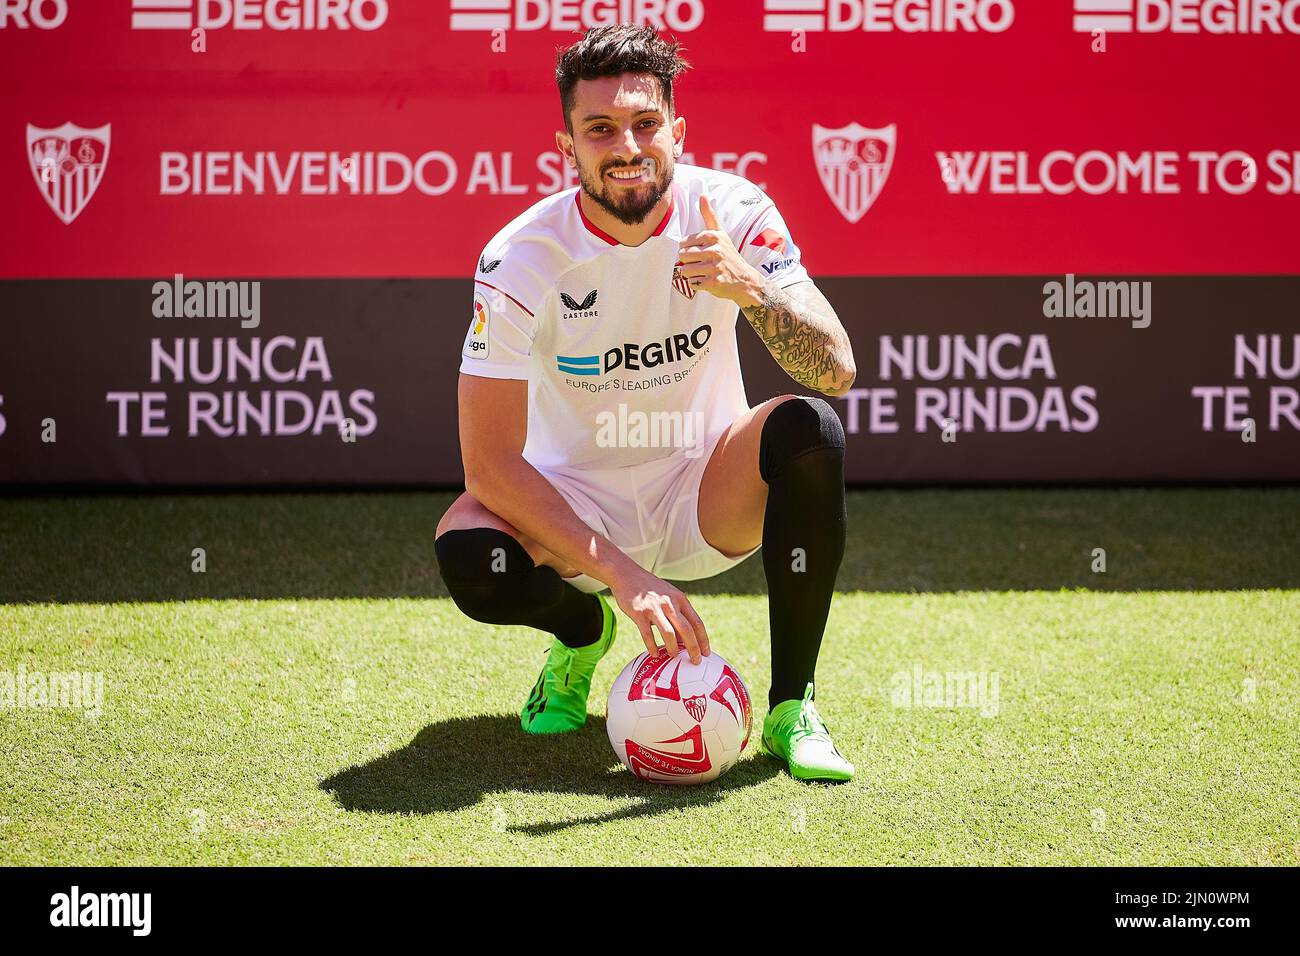 Seville, Spain. 08th Aug, 2022. Sevilla FC present the Brazilian footballer Alex Telles as a new signing at a press conference at the Ramon Sanchez-Pizjuan stadium in Seville. Alex Telles joins Sevilla FC on a loan deal from Manchester United. (Photo Credit: Gonzales Photo/Alamy Live News Stock Photo